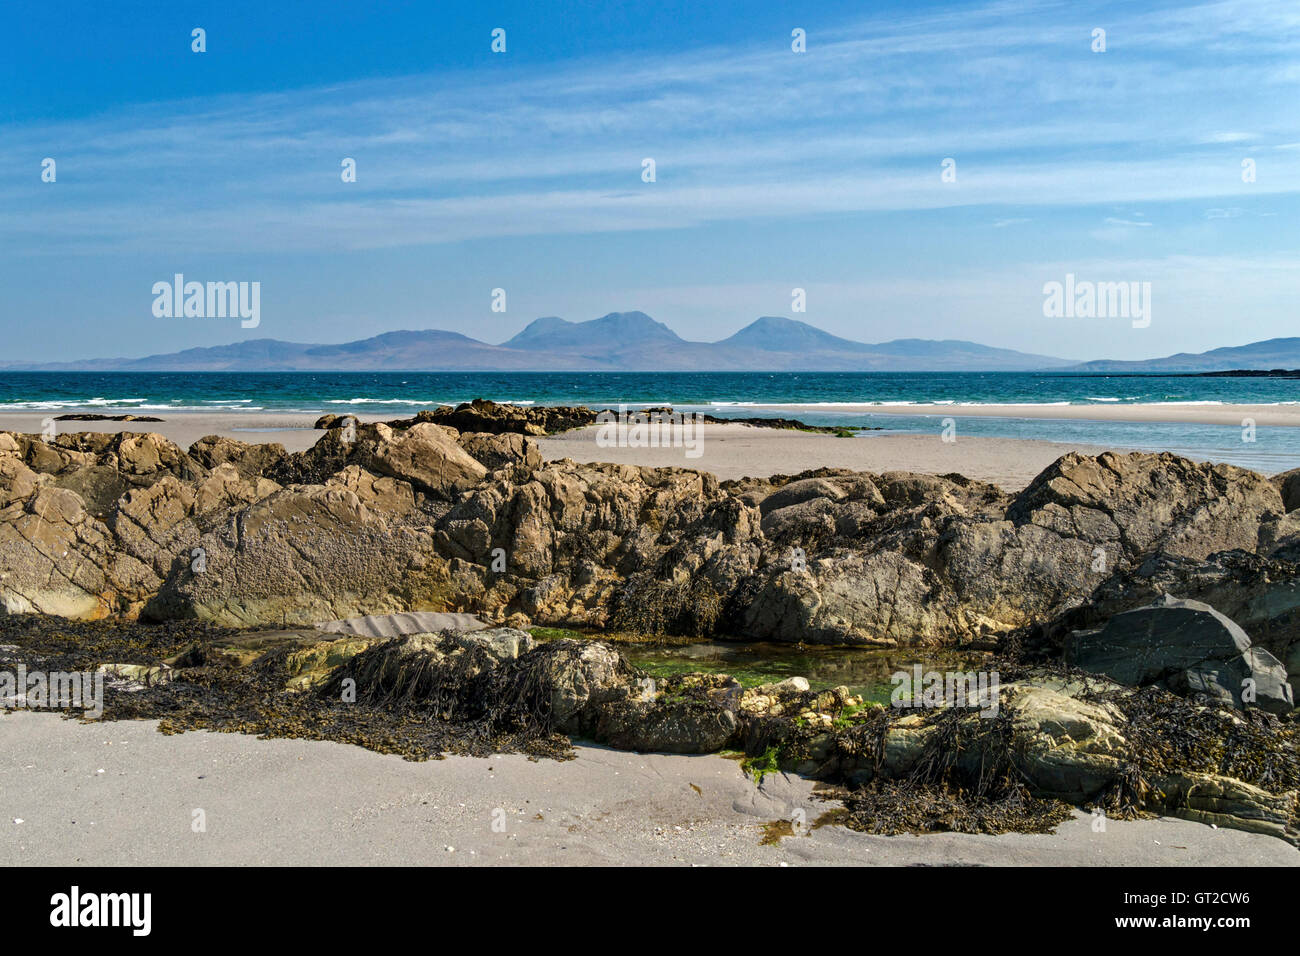 The Isle of Jura seen from sandy beach at The Strand on the Hebridean Island of Colonsay, Scotland, UK. Stock Photo